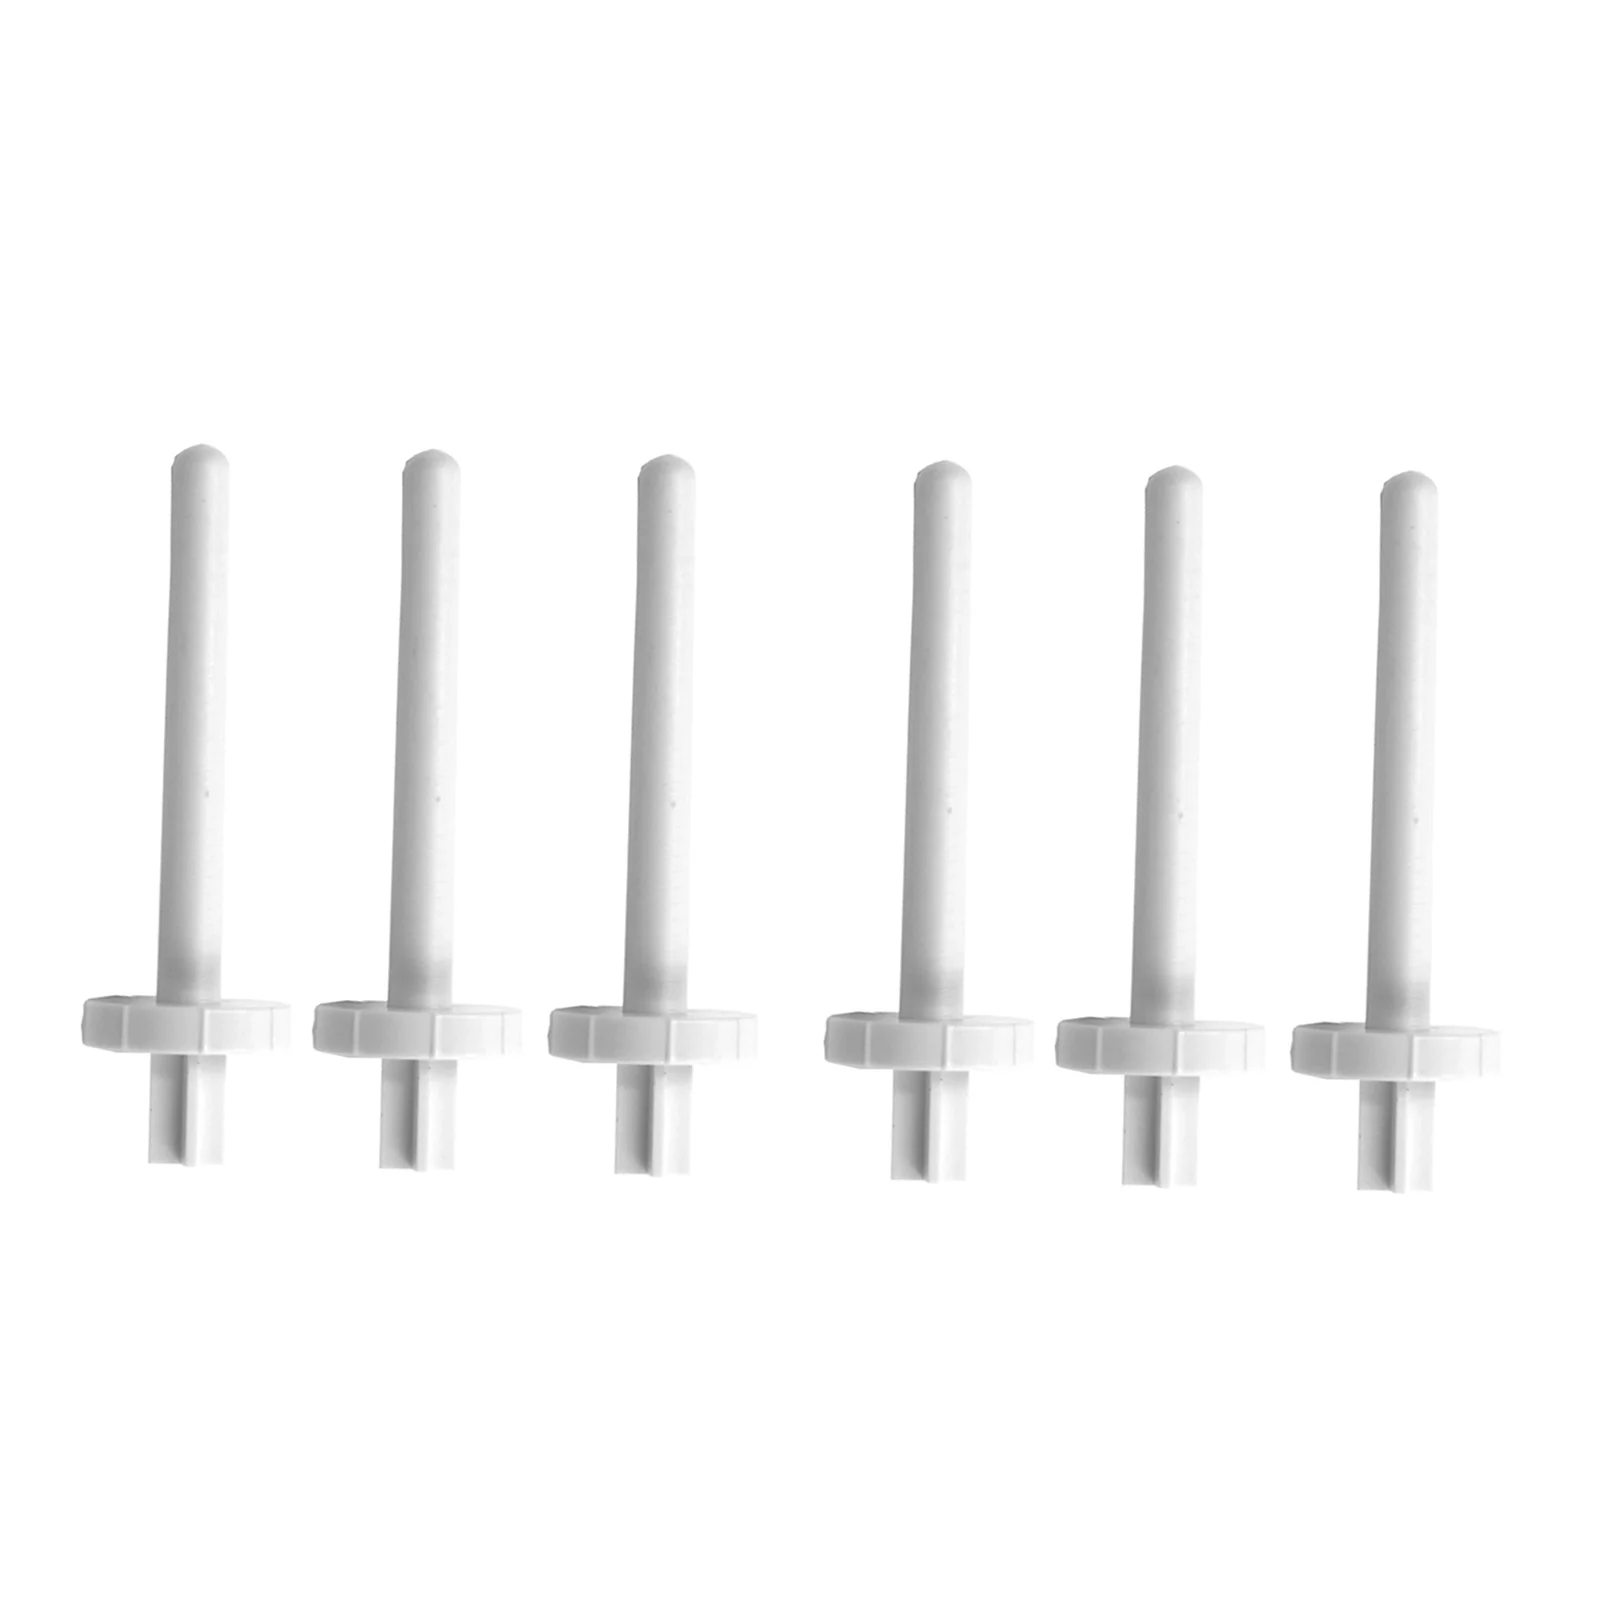 6x Spool Pin Home Sewing Machine Accessories Bobbin Embroidery Stand Holder Accessories Parts Fits for Singer